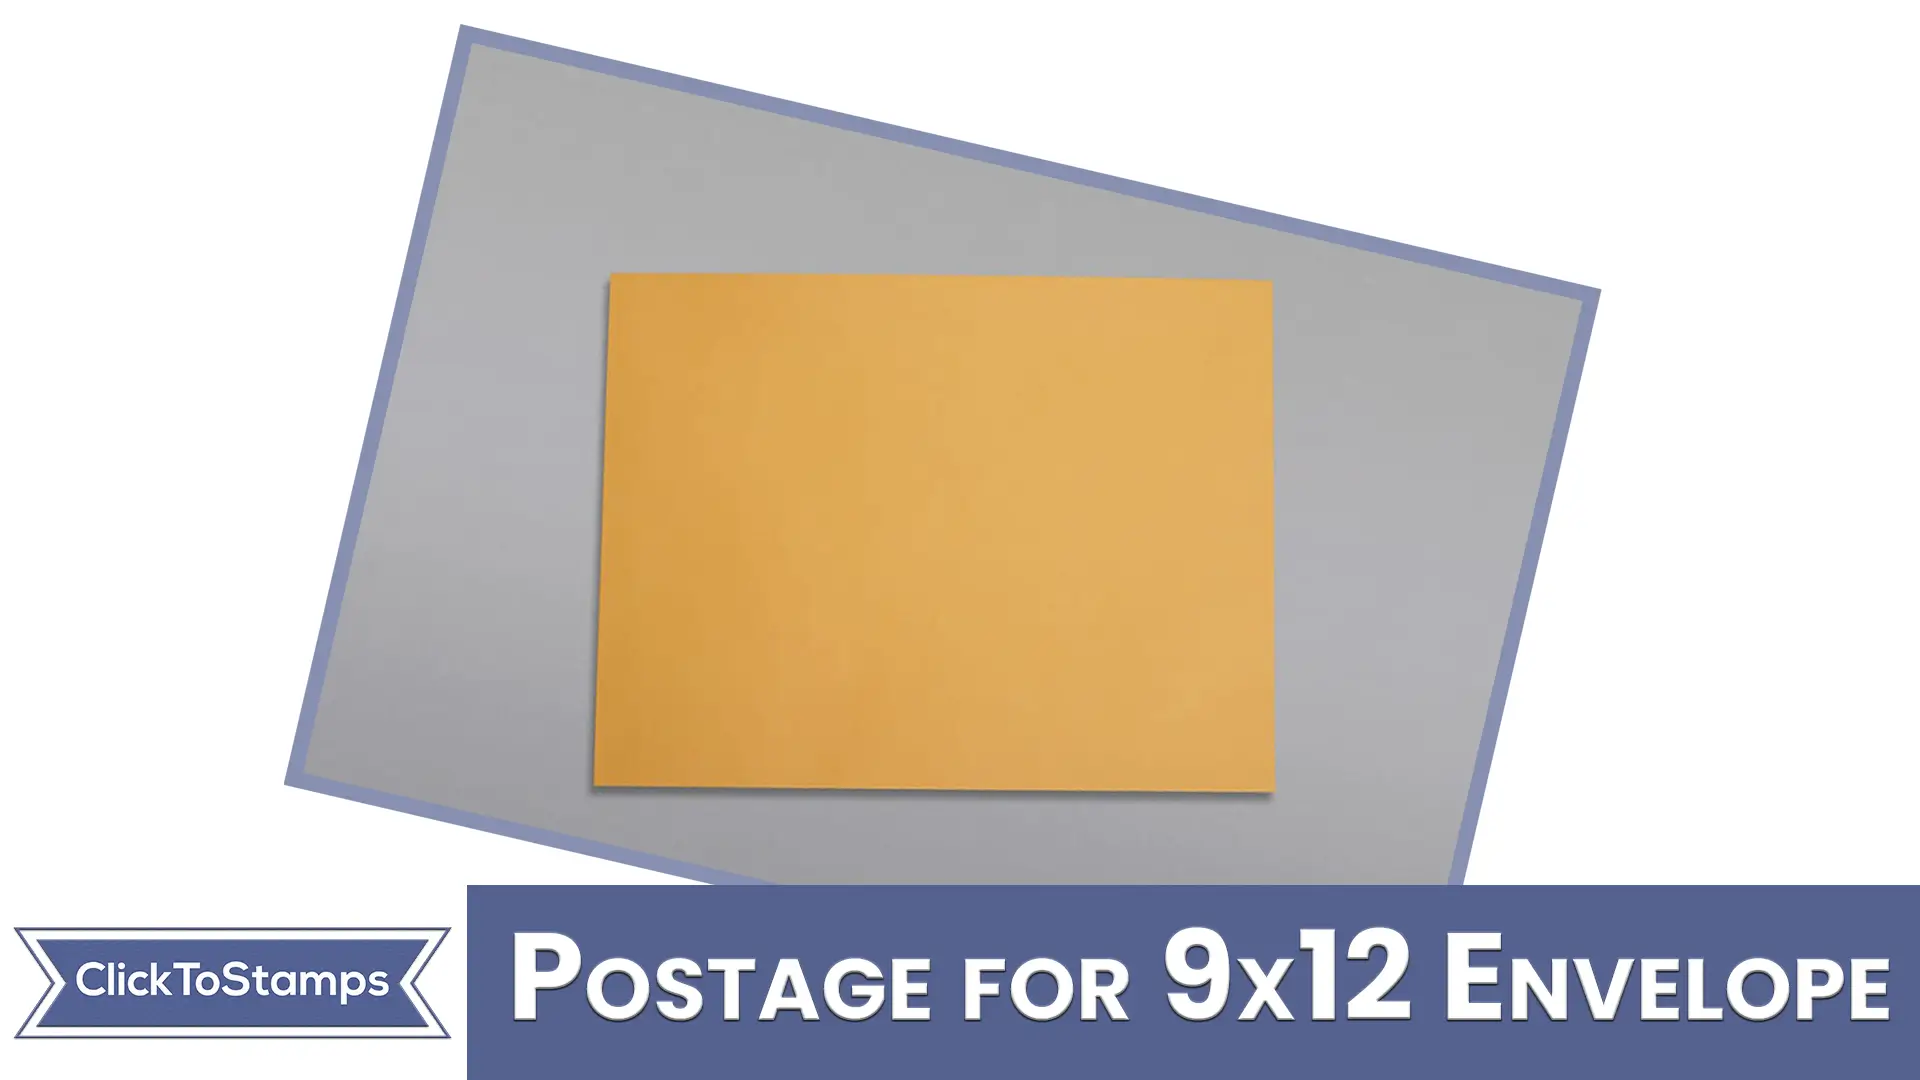 How many stamps should i put on a 9×12 envelope